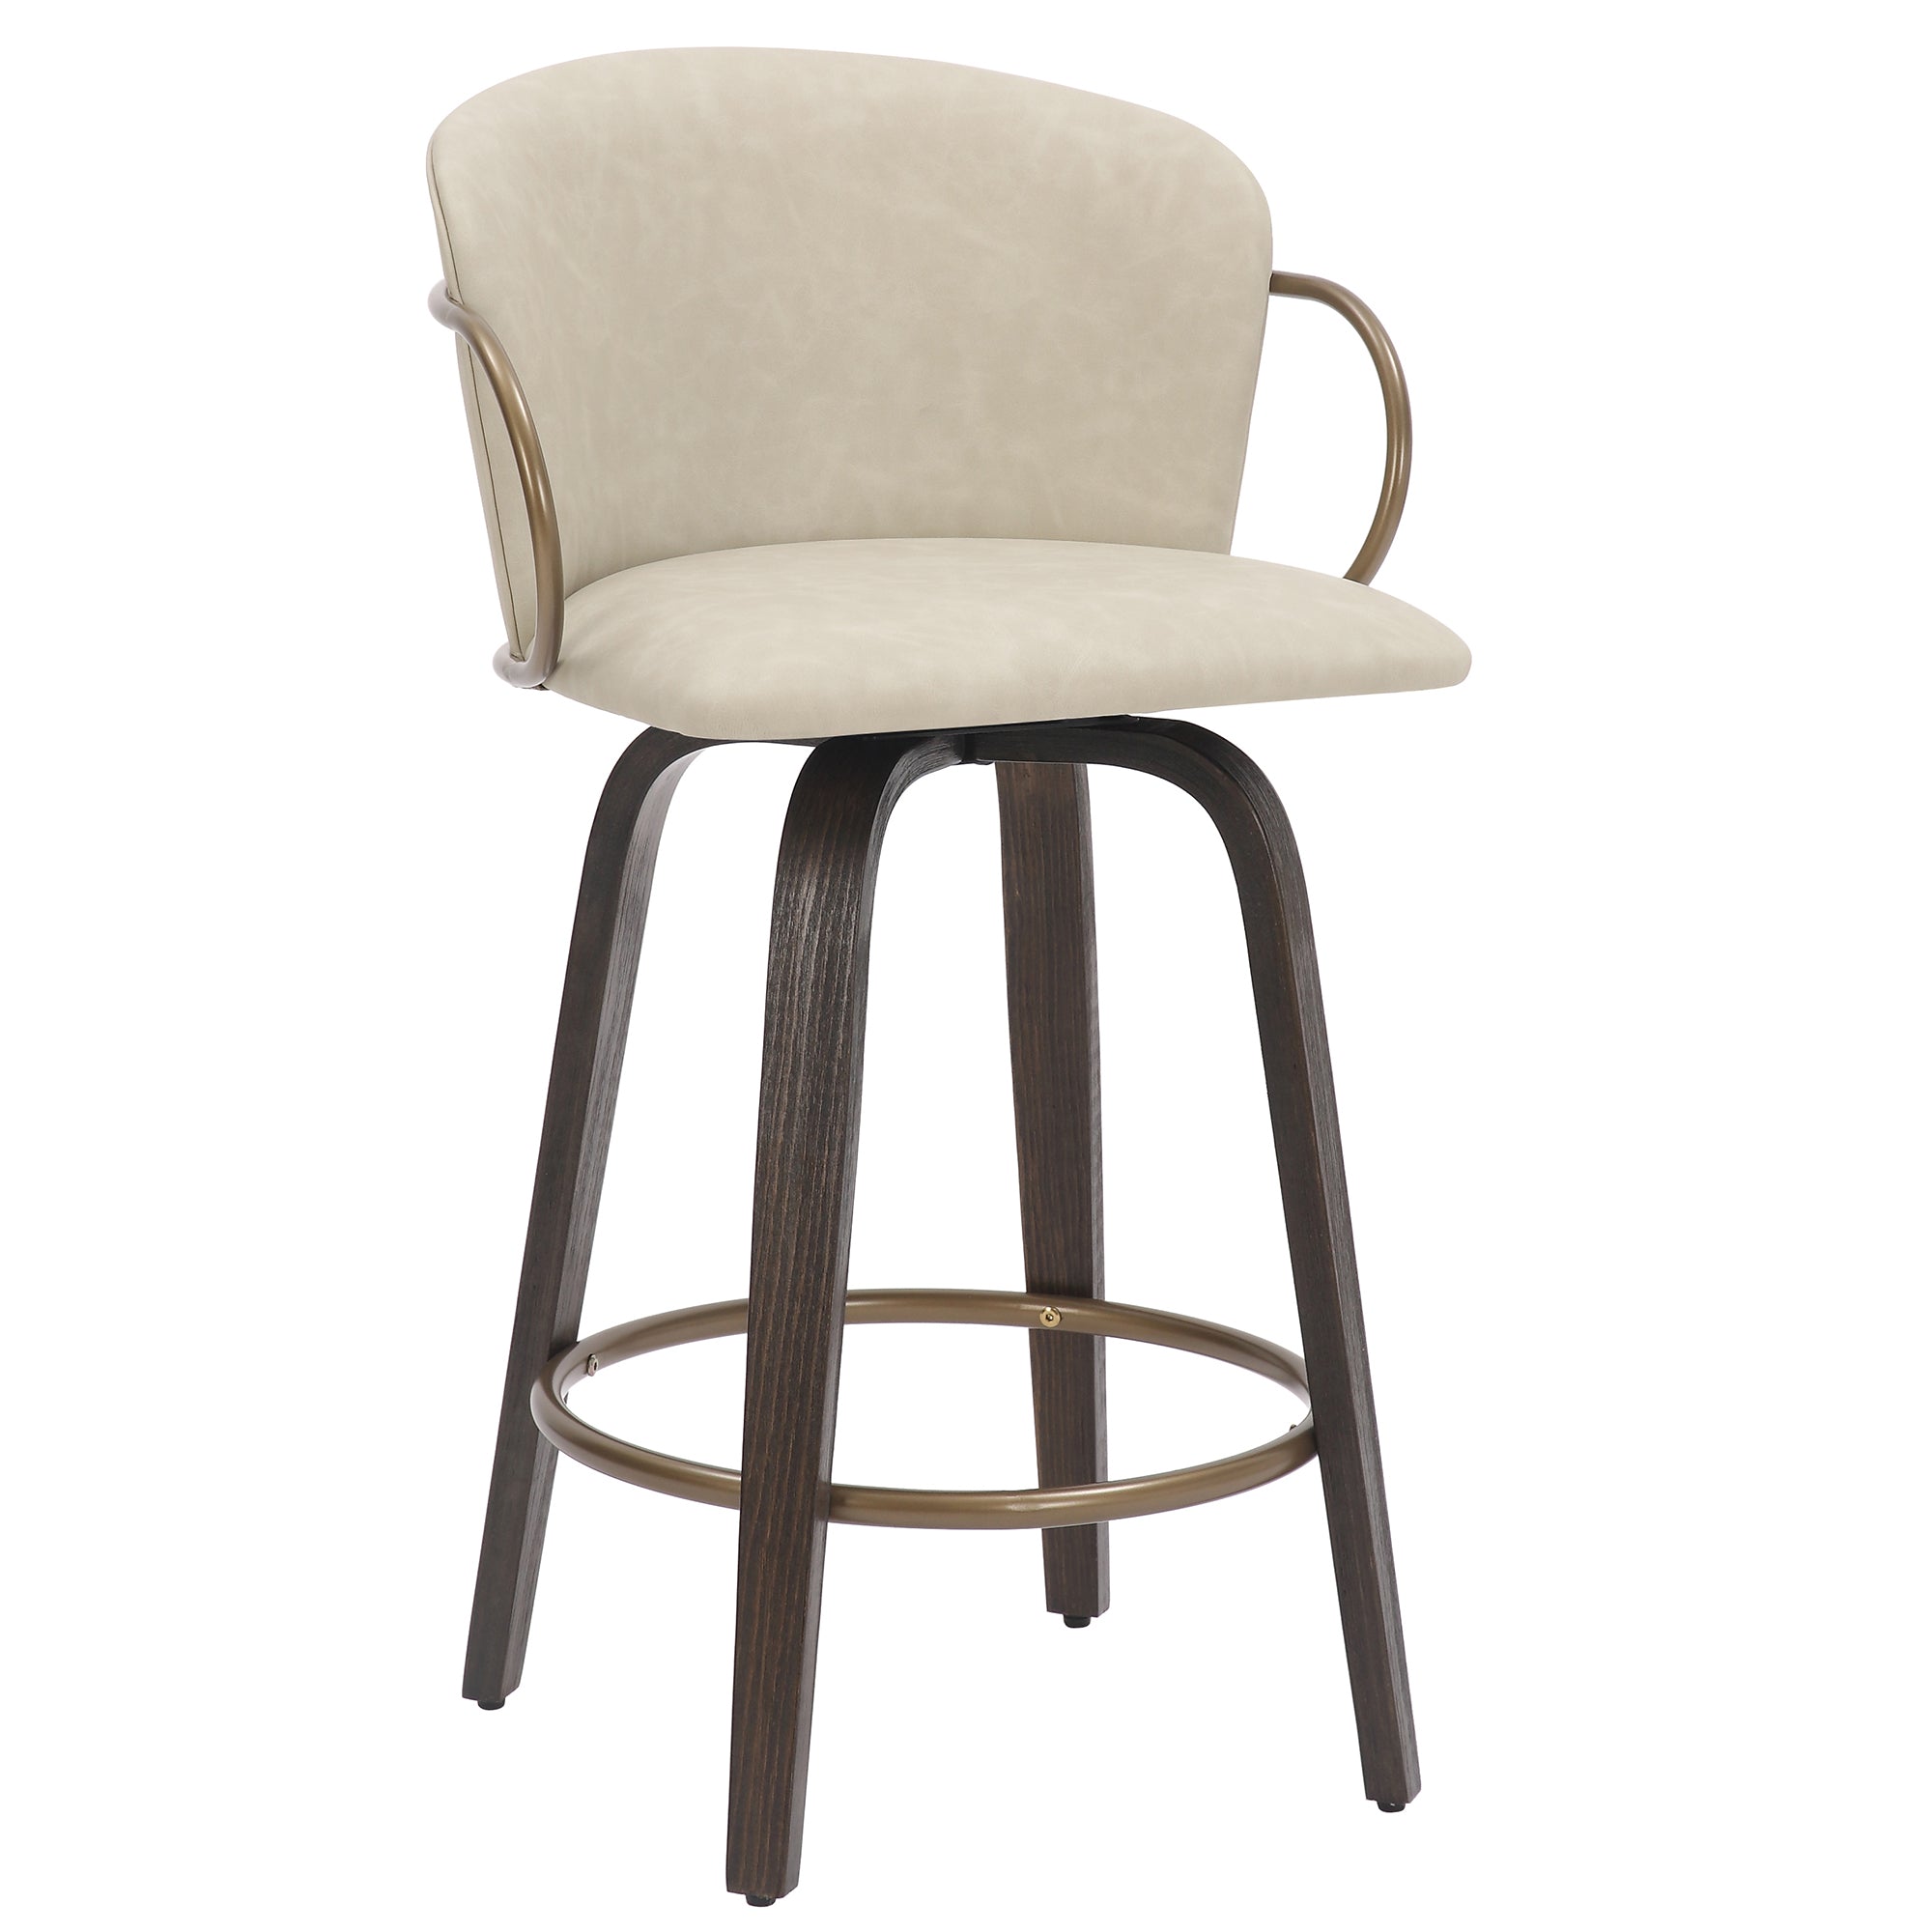 Lawson 26" Counter Stool, Set of 2, with Swivel in Vintage Ivory, Brown and Aged Gold 203-634IV